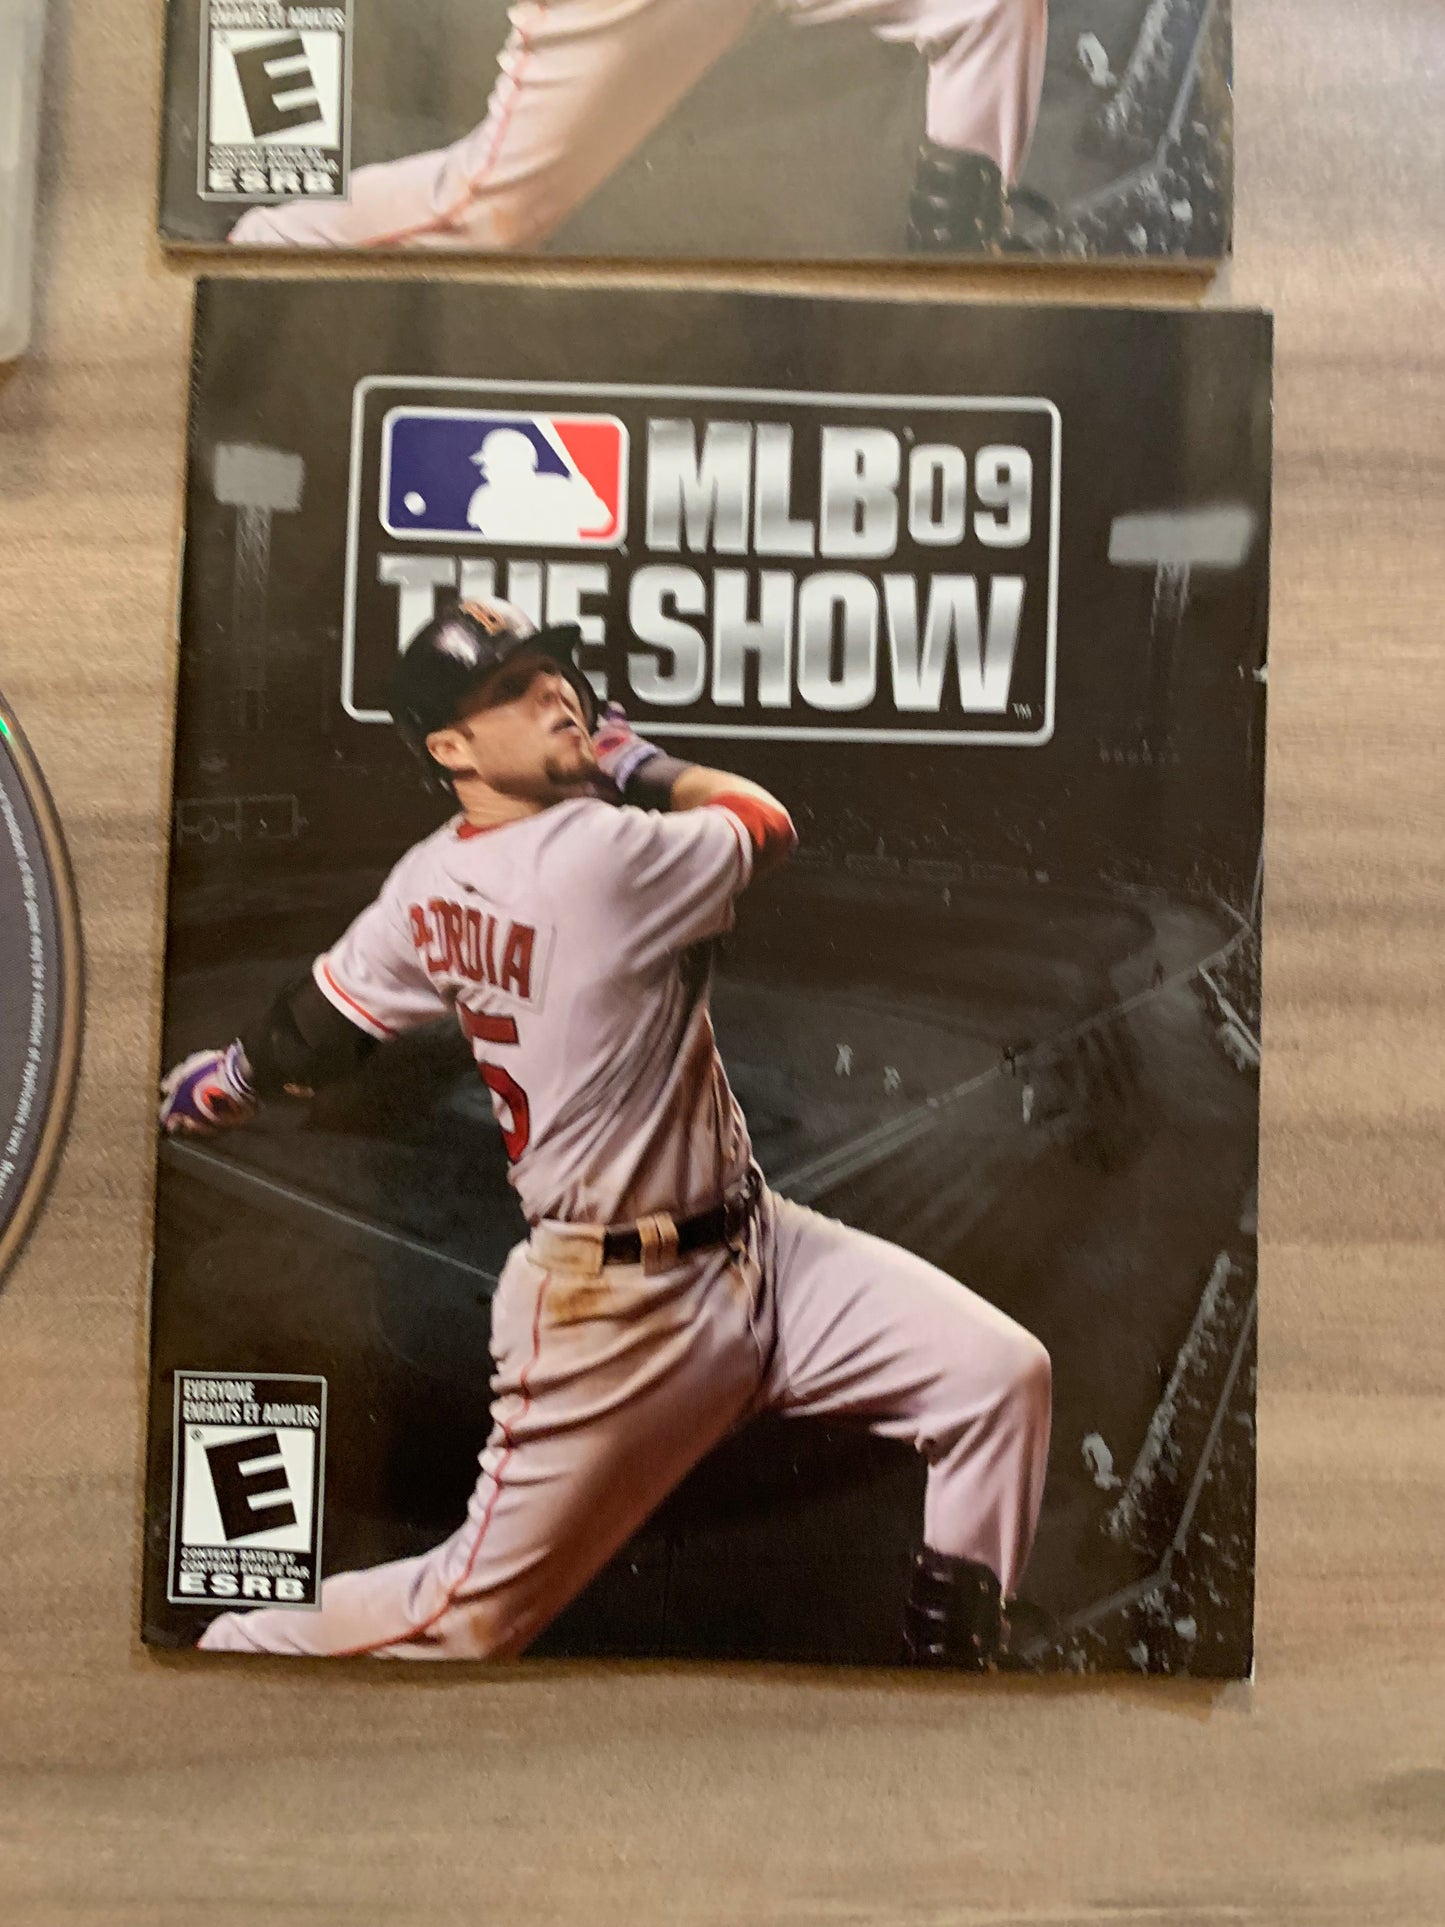 SONY PLAYSTATiON 3 [PS3] | MLB 09 THE SHOW